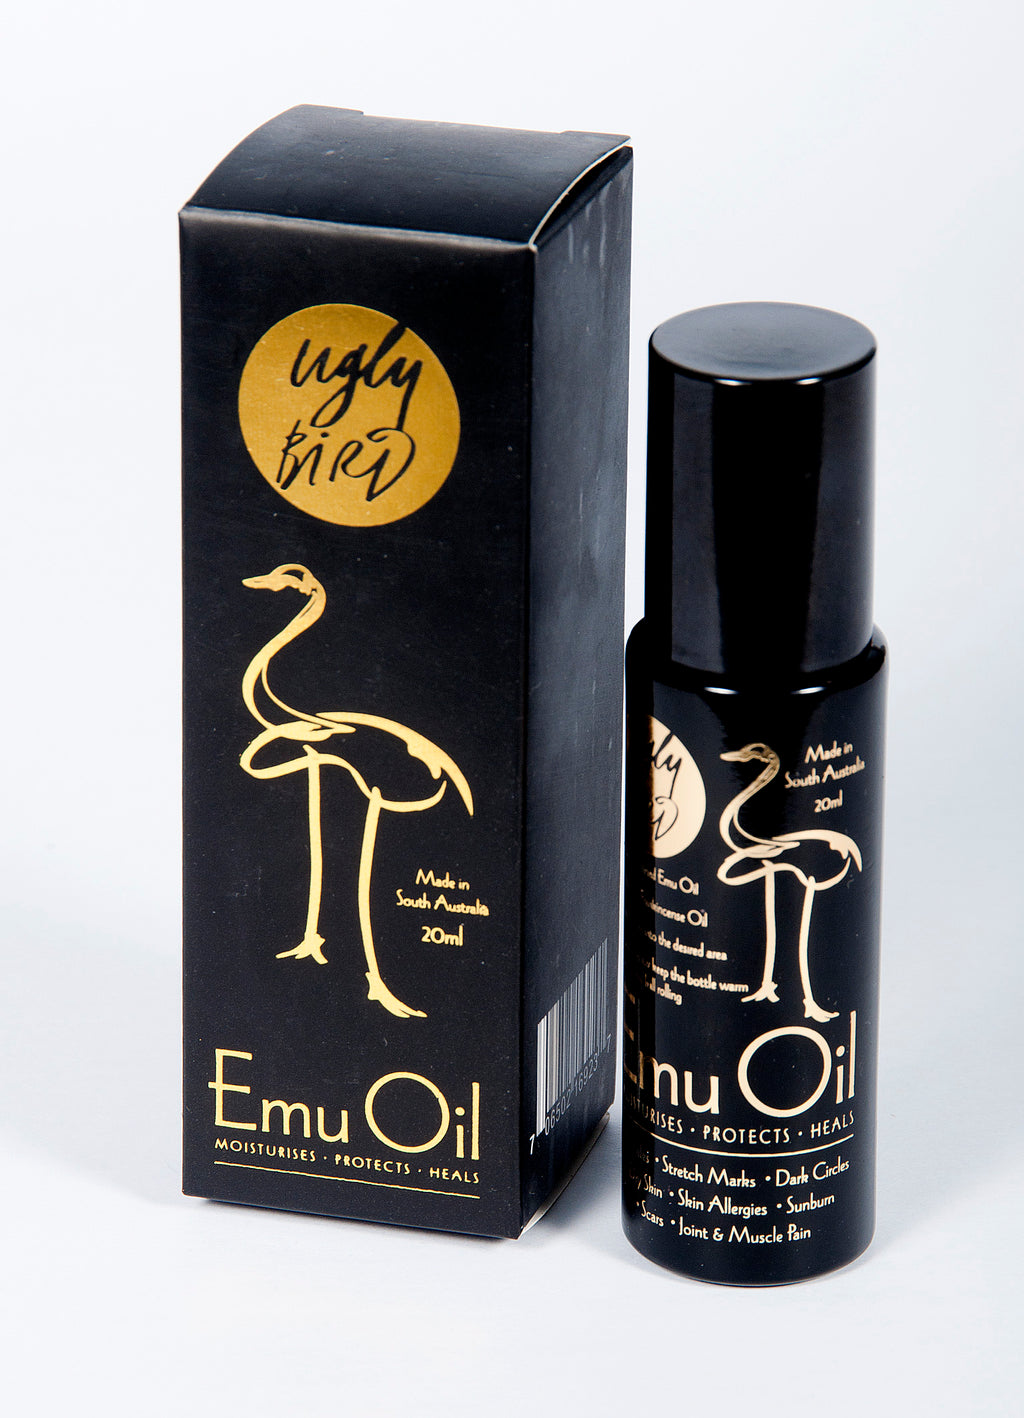 Ugly Bird Emu Oil, infused with Frankincense.